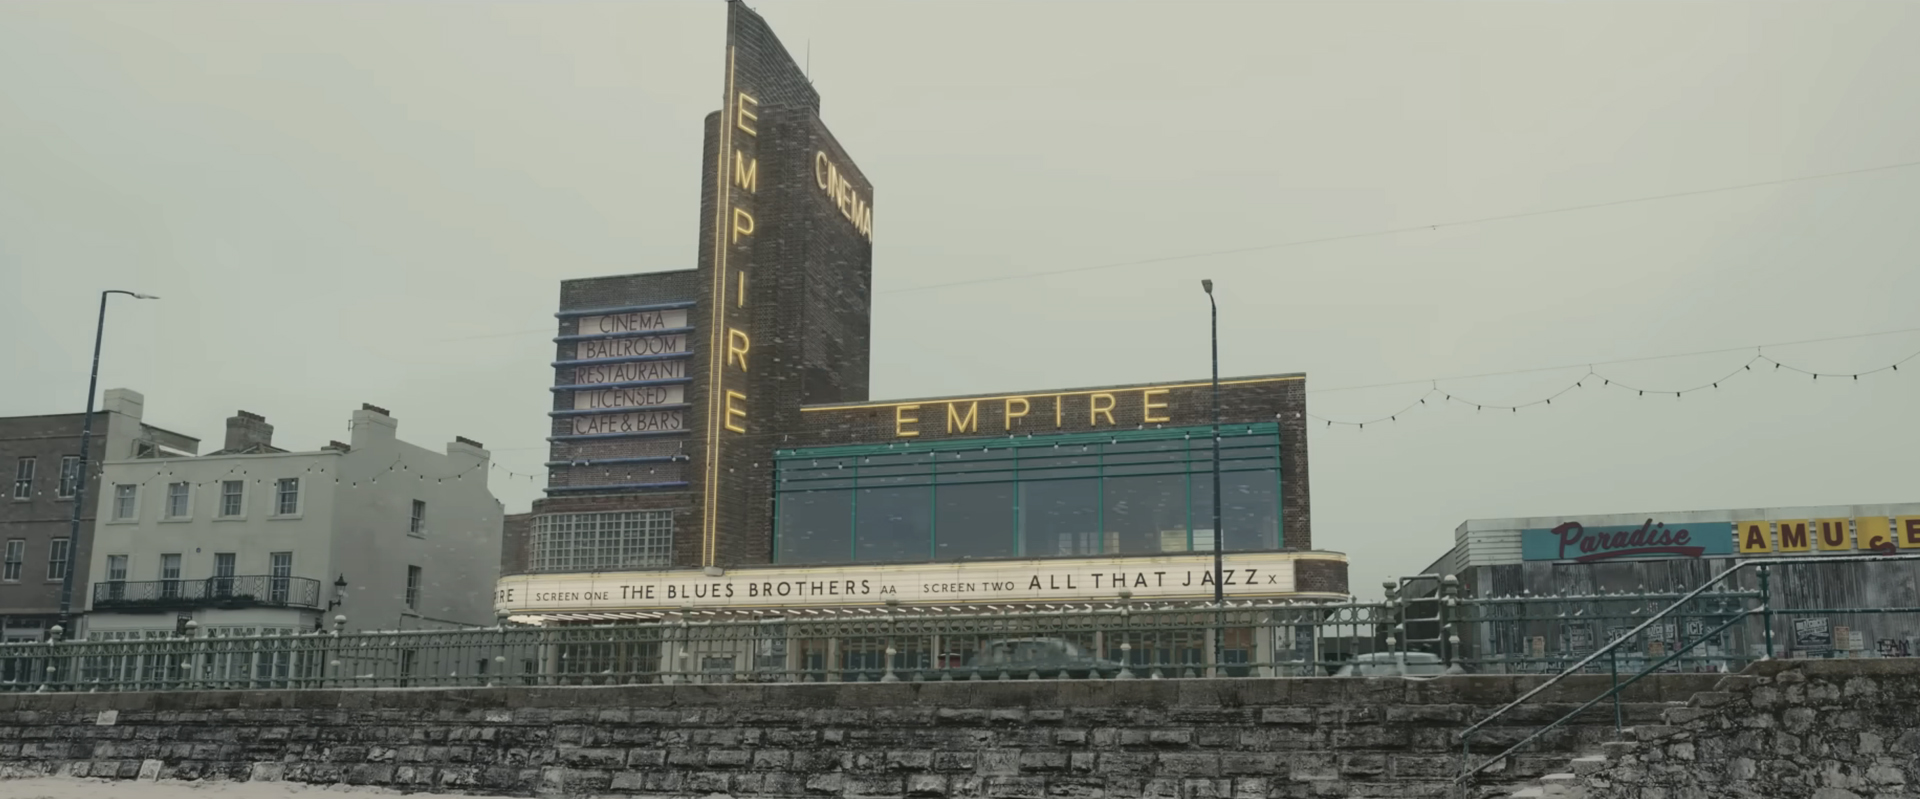 The subtle cinematography of Roger Deakins on "Empire of Light": an Empire cinema taking place of Dreamland theater in Margate